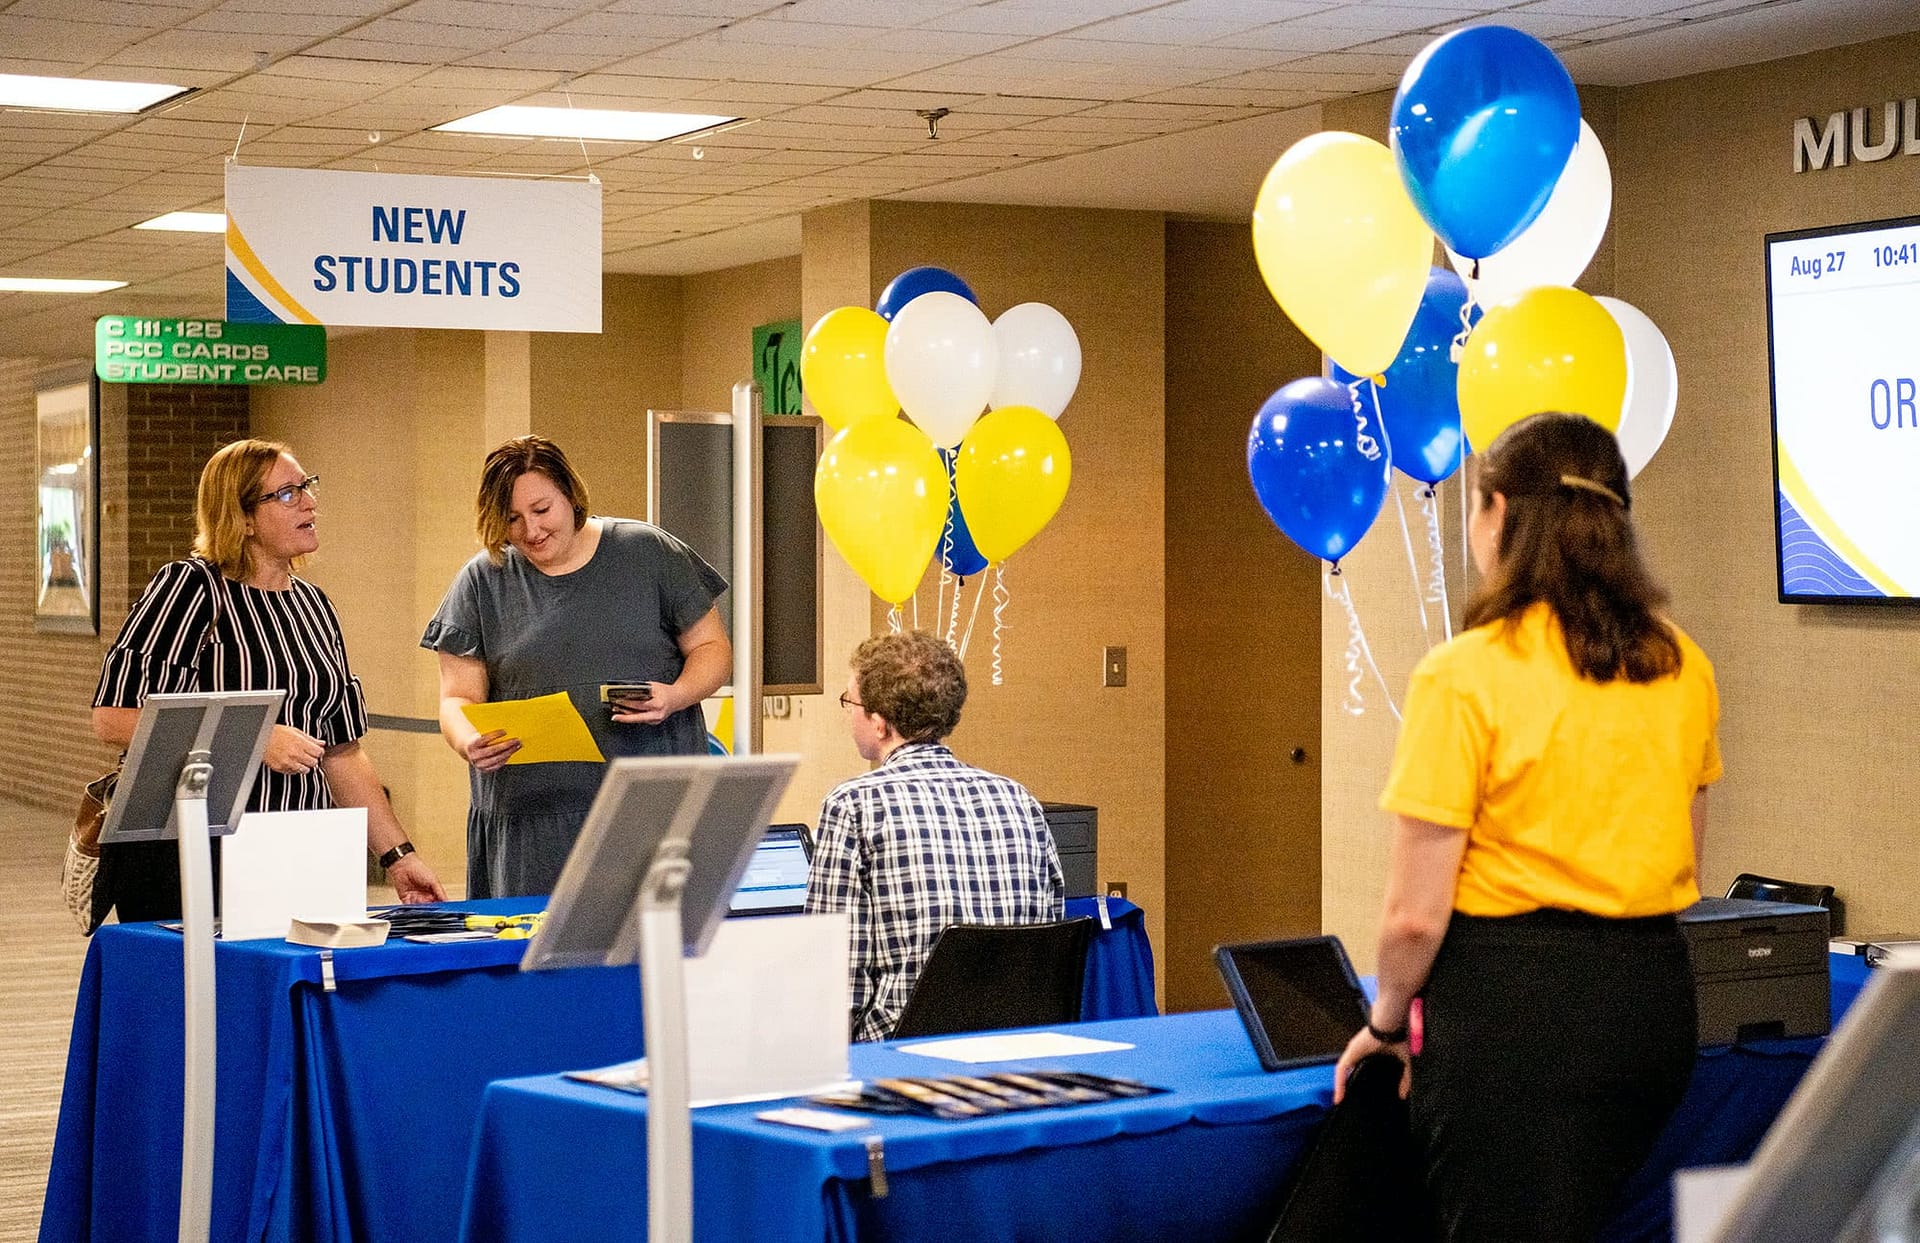 New students checking in at the Academic Center for the new semester